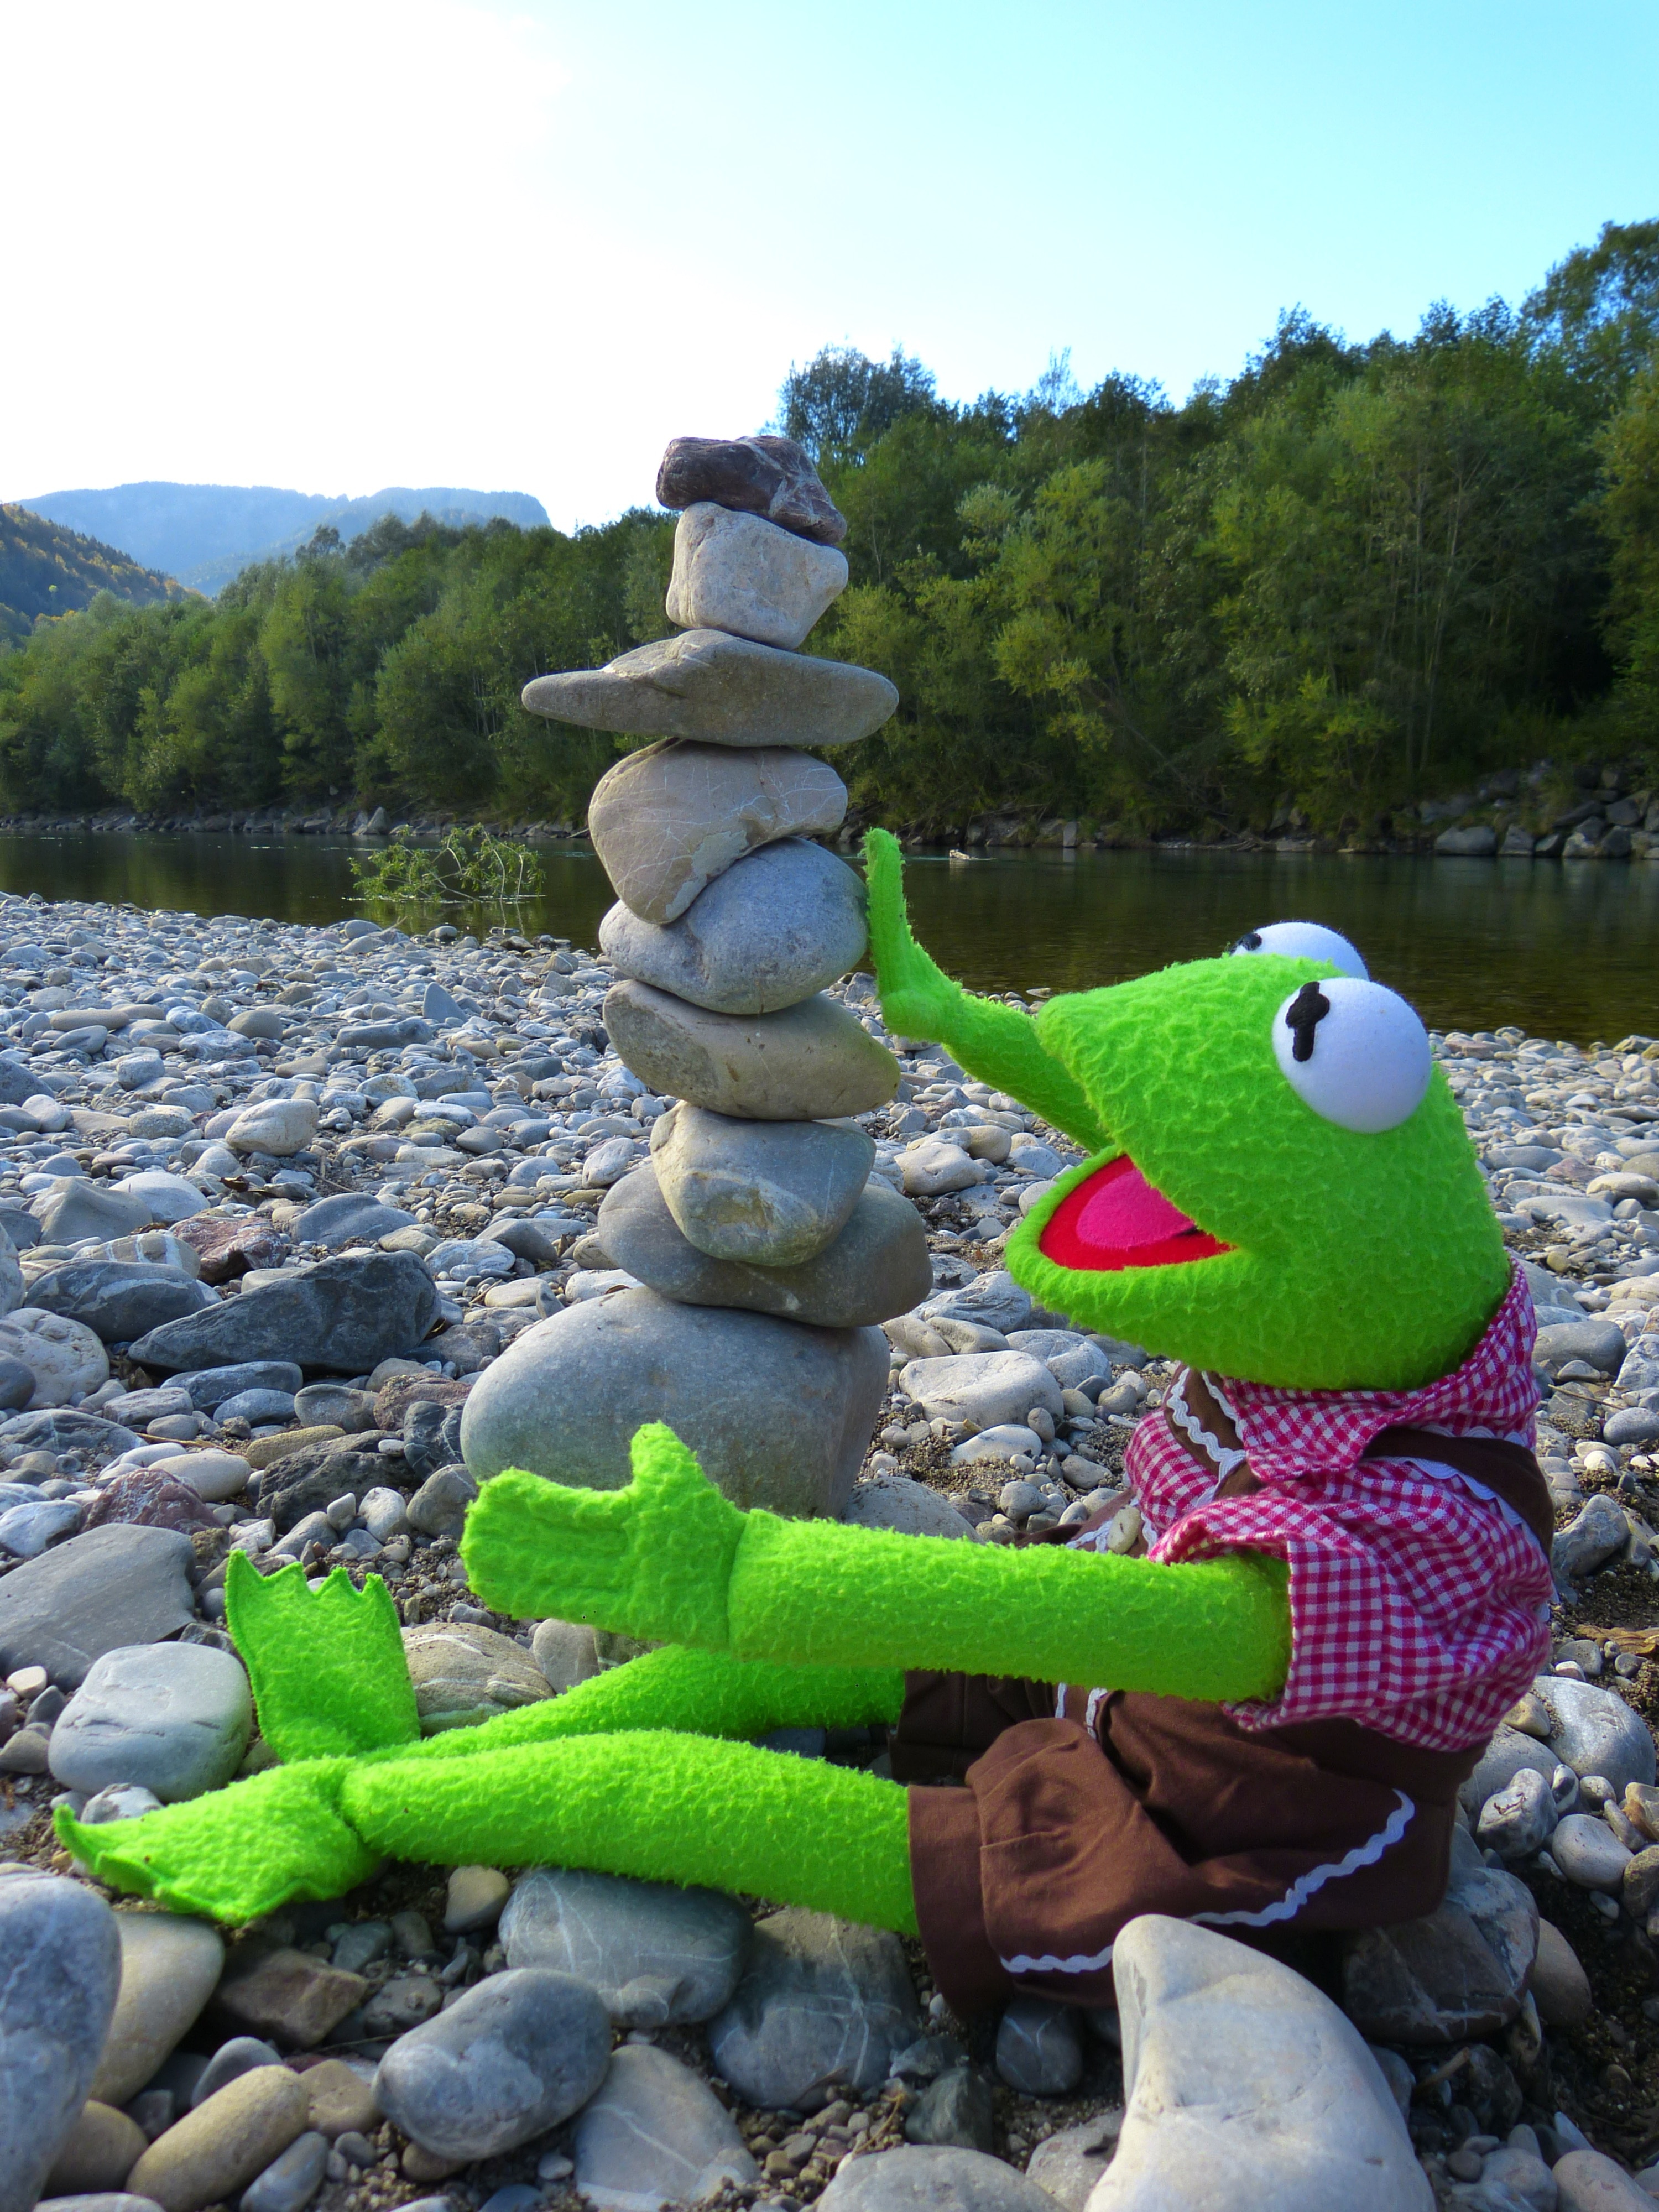 Cairn, Kermit, Stones, Frog, Build Tower, day, outdoors